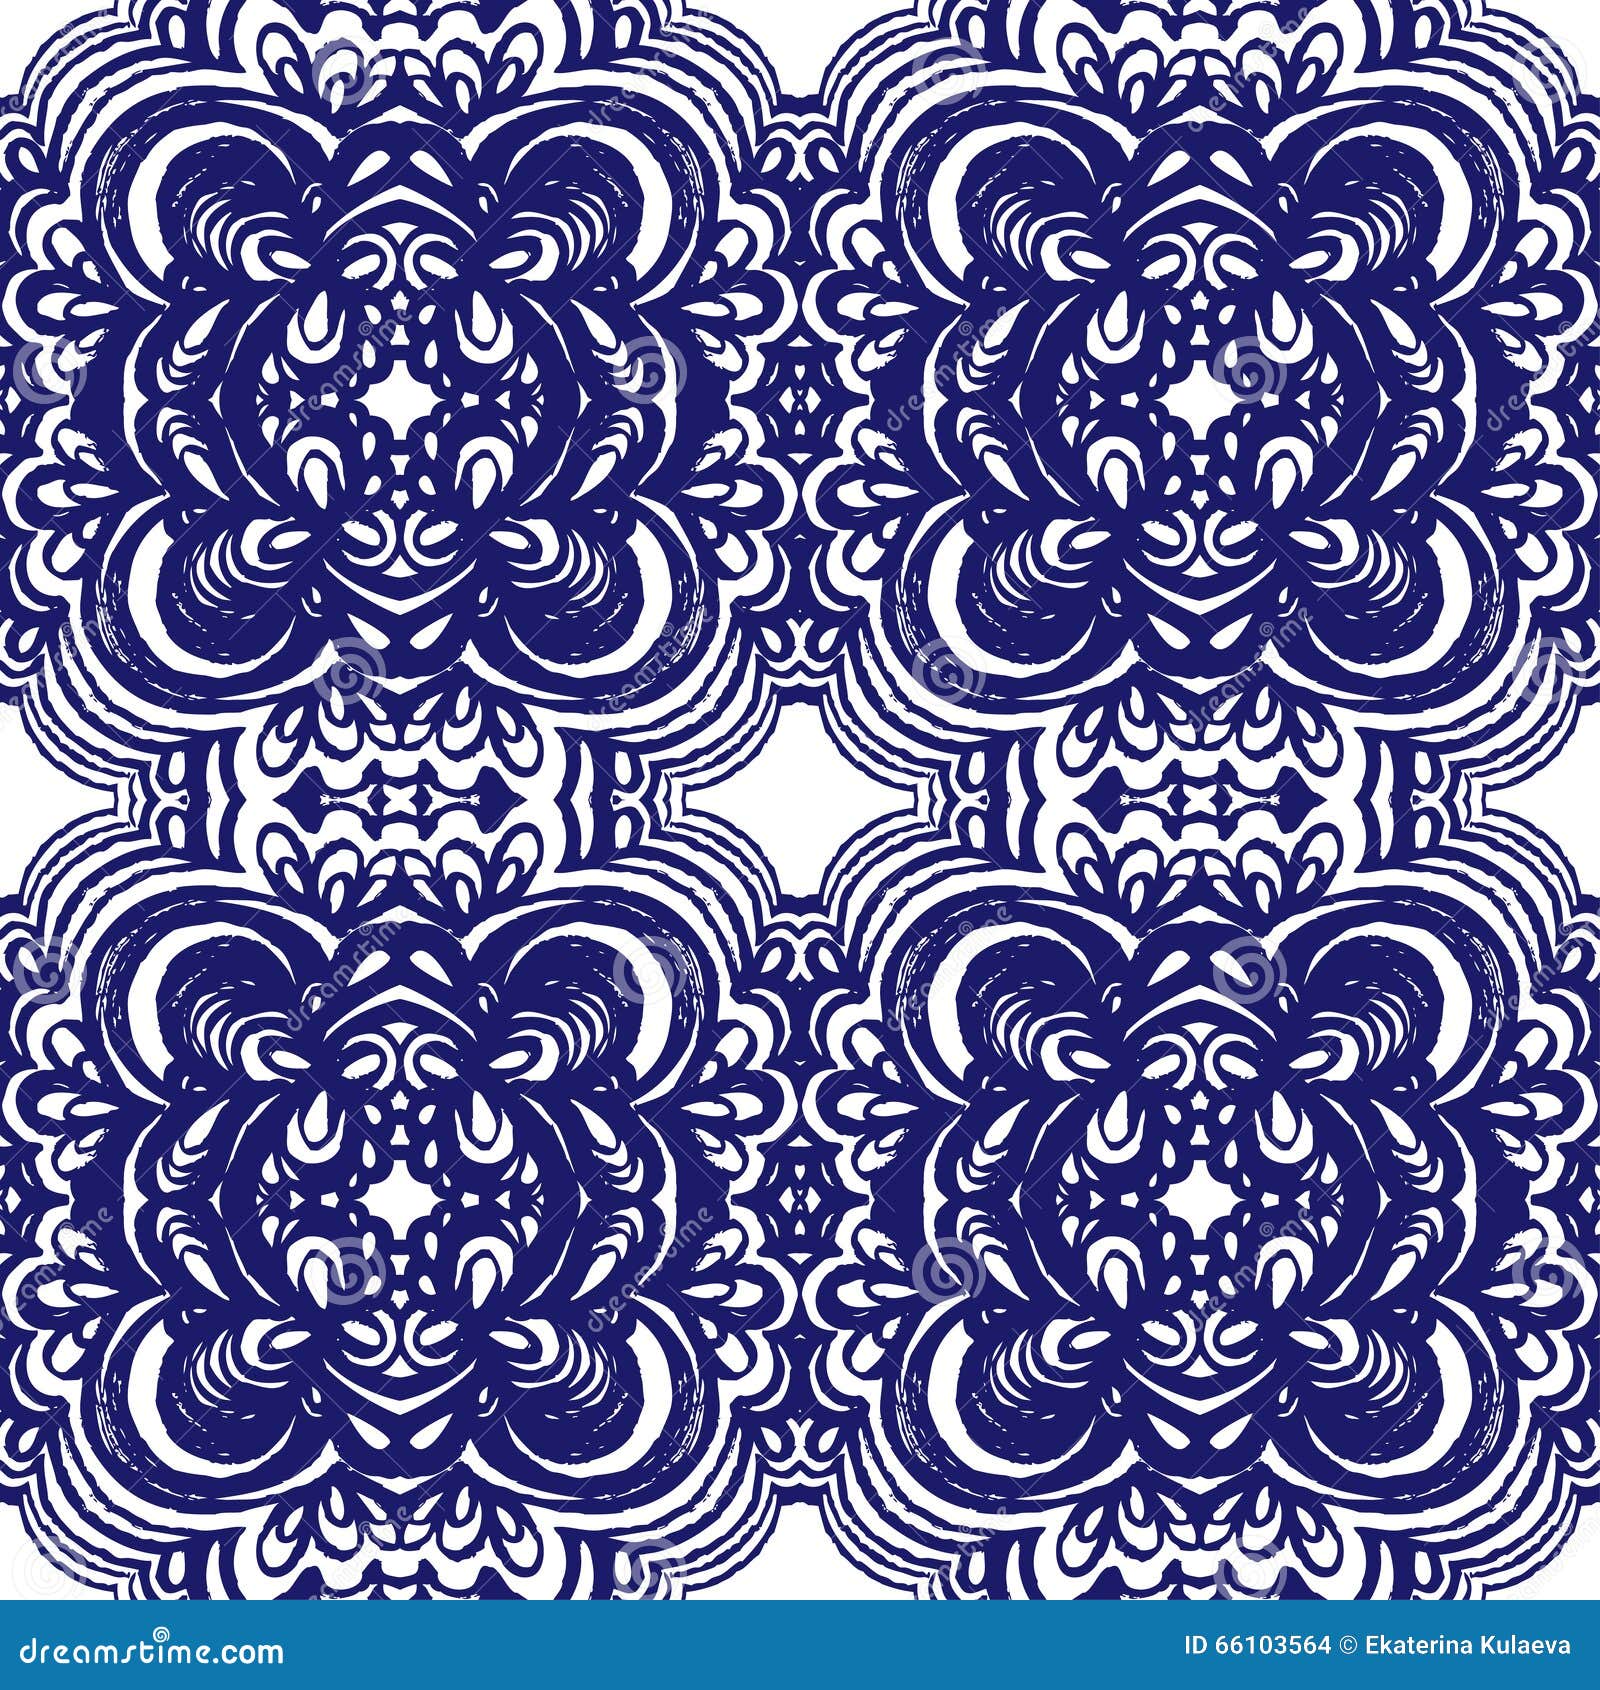 Moroccan Tiles Ornaments In Blue And White Colors. Stock Vector Illustration of arabesque